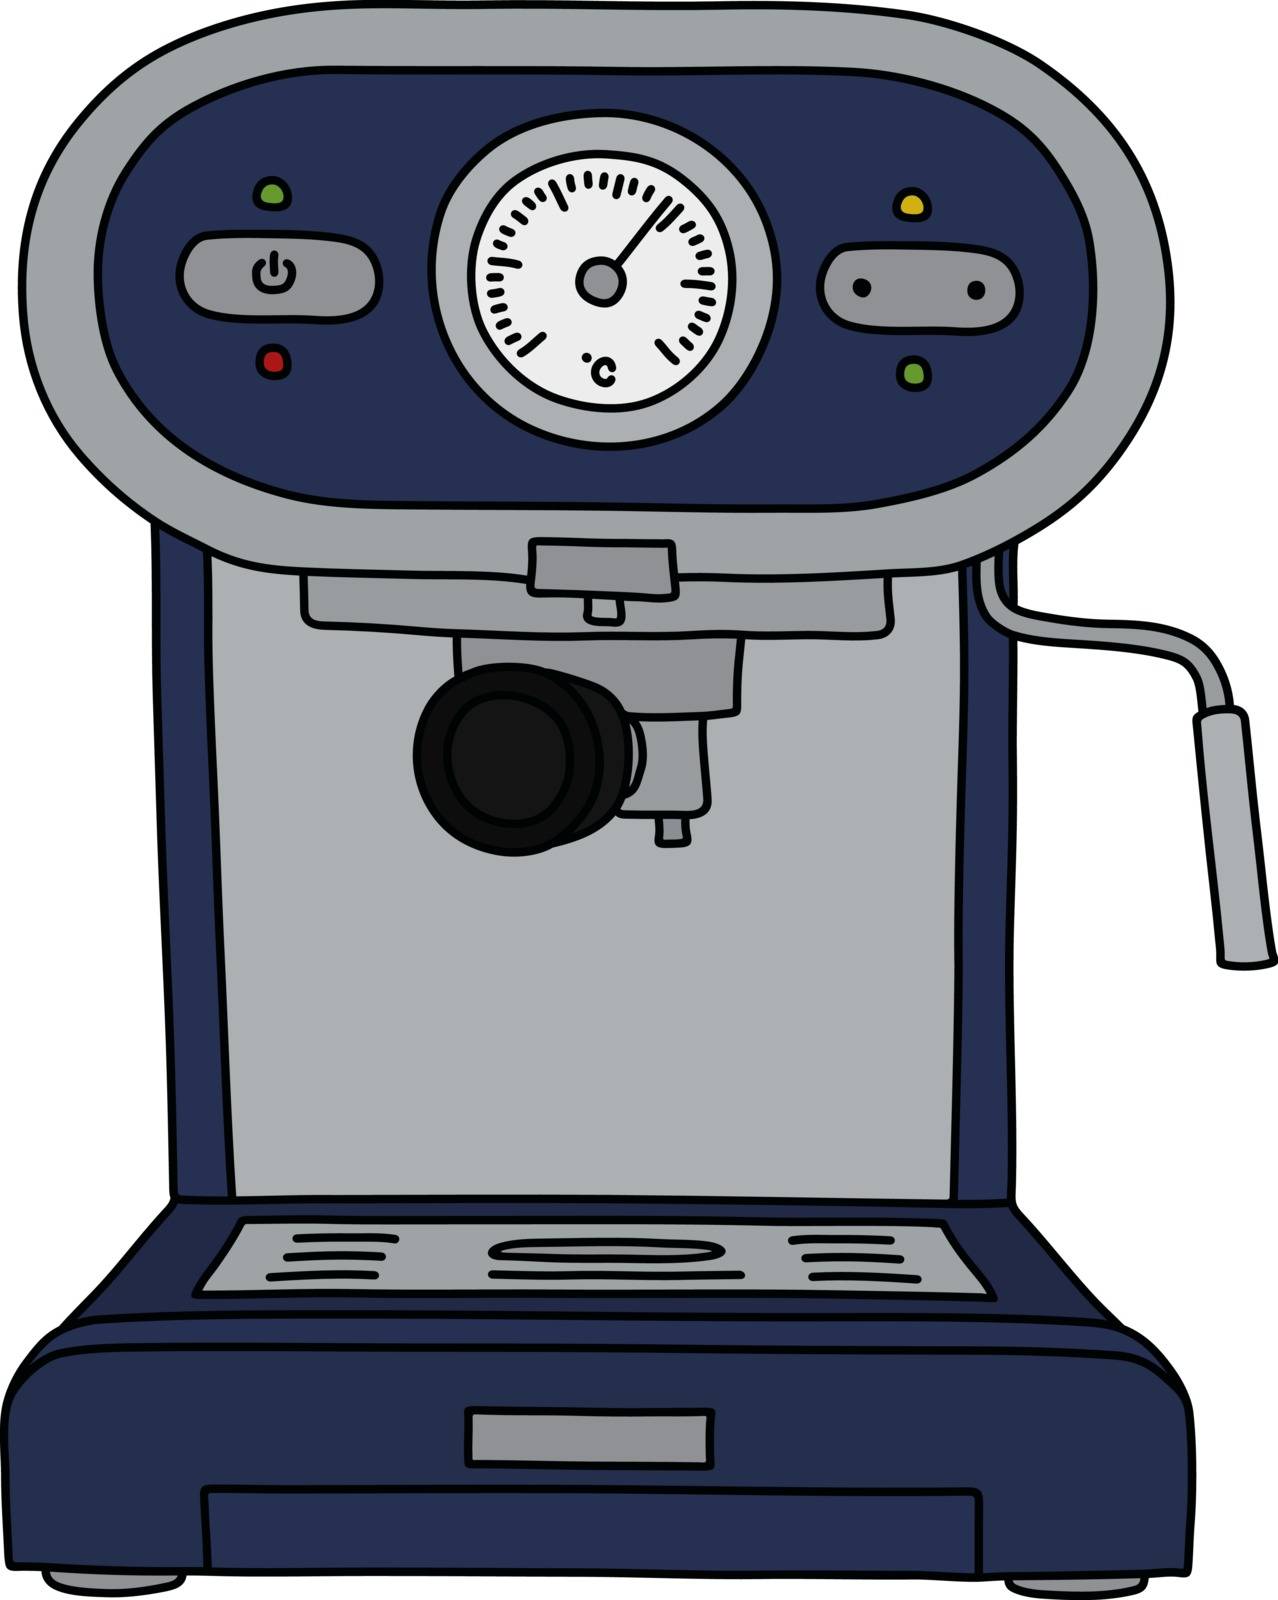 The blue electric espresso maker by vostal